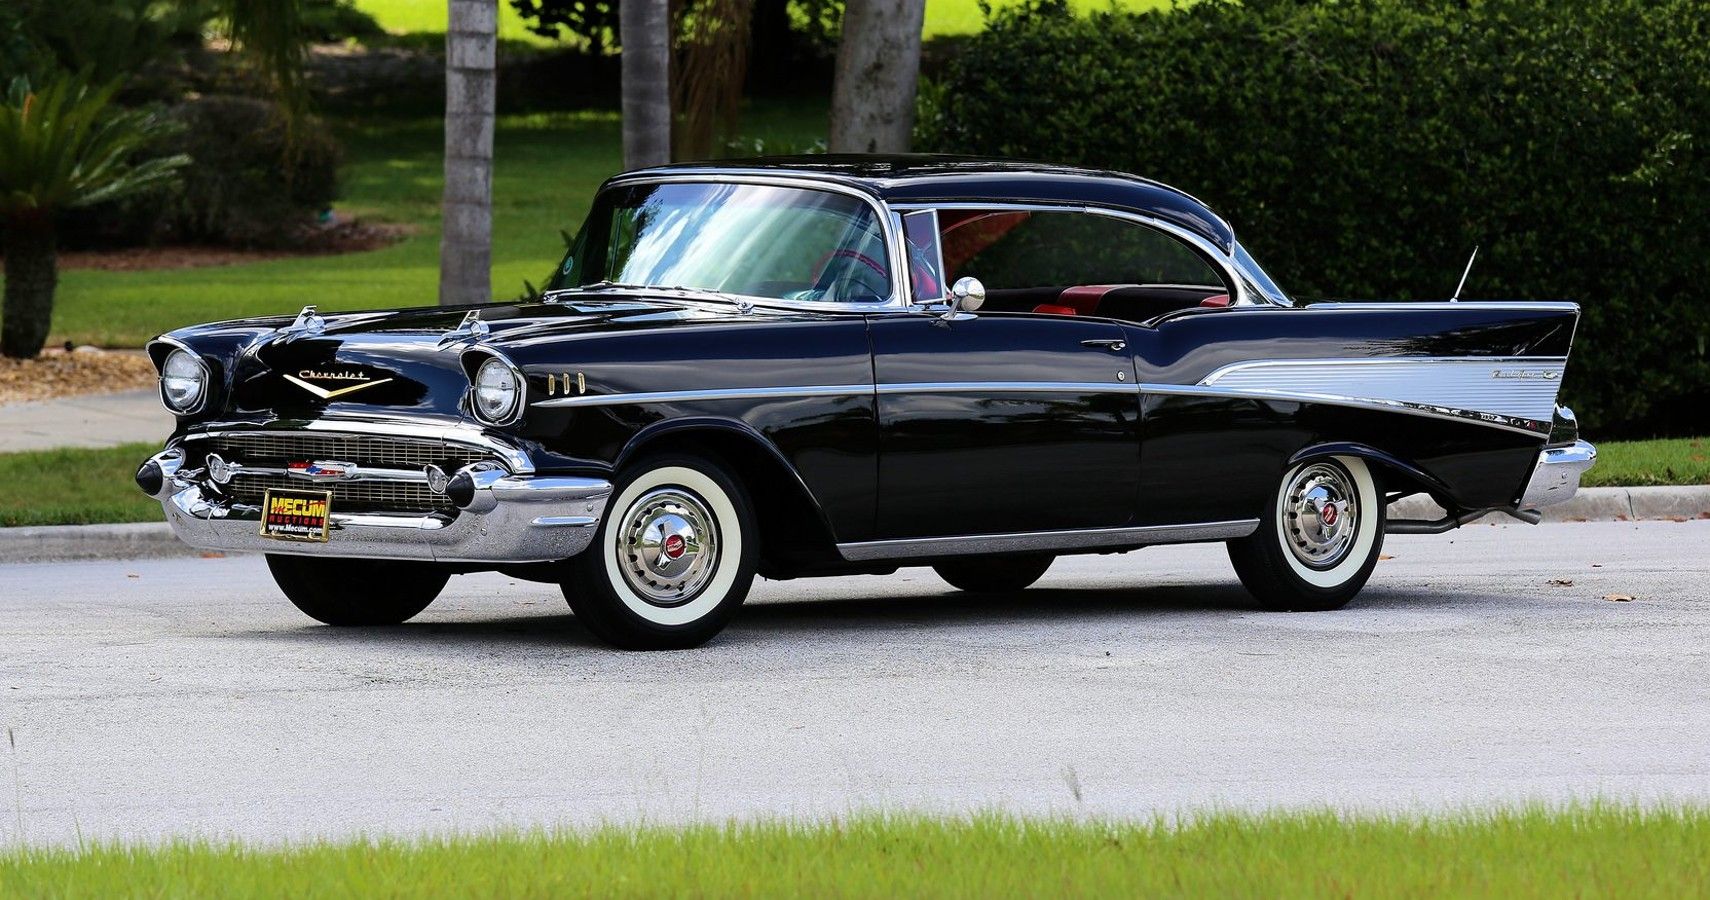 A Detailed Look At The 1957 Chevrolet Bel Air Sport Coupe From 'Dirty Dancing'